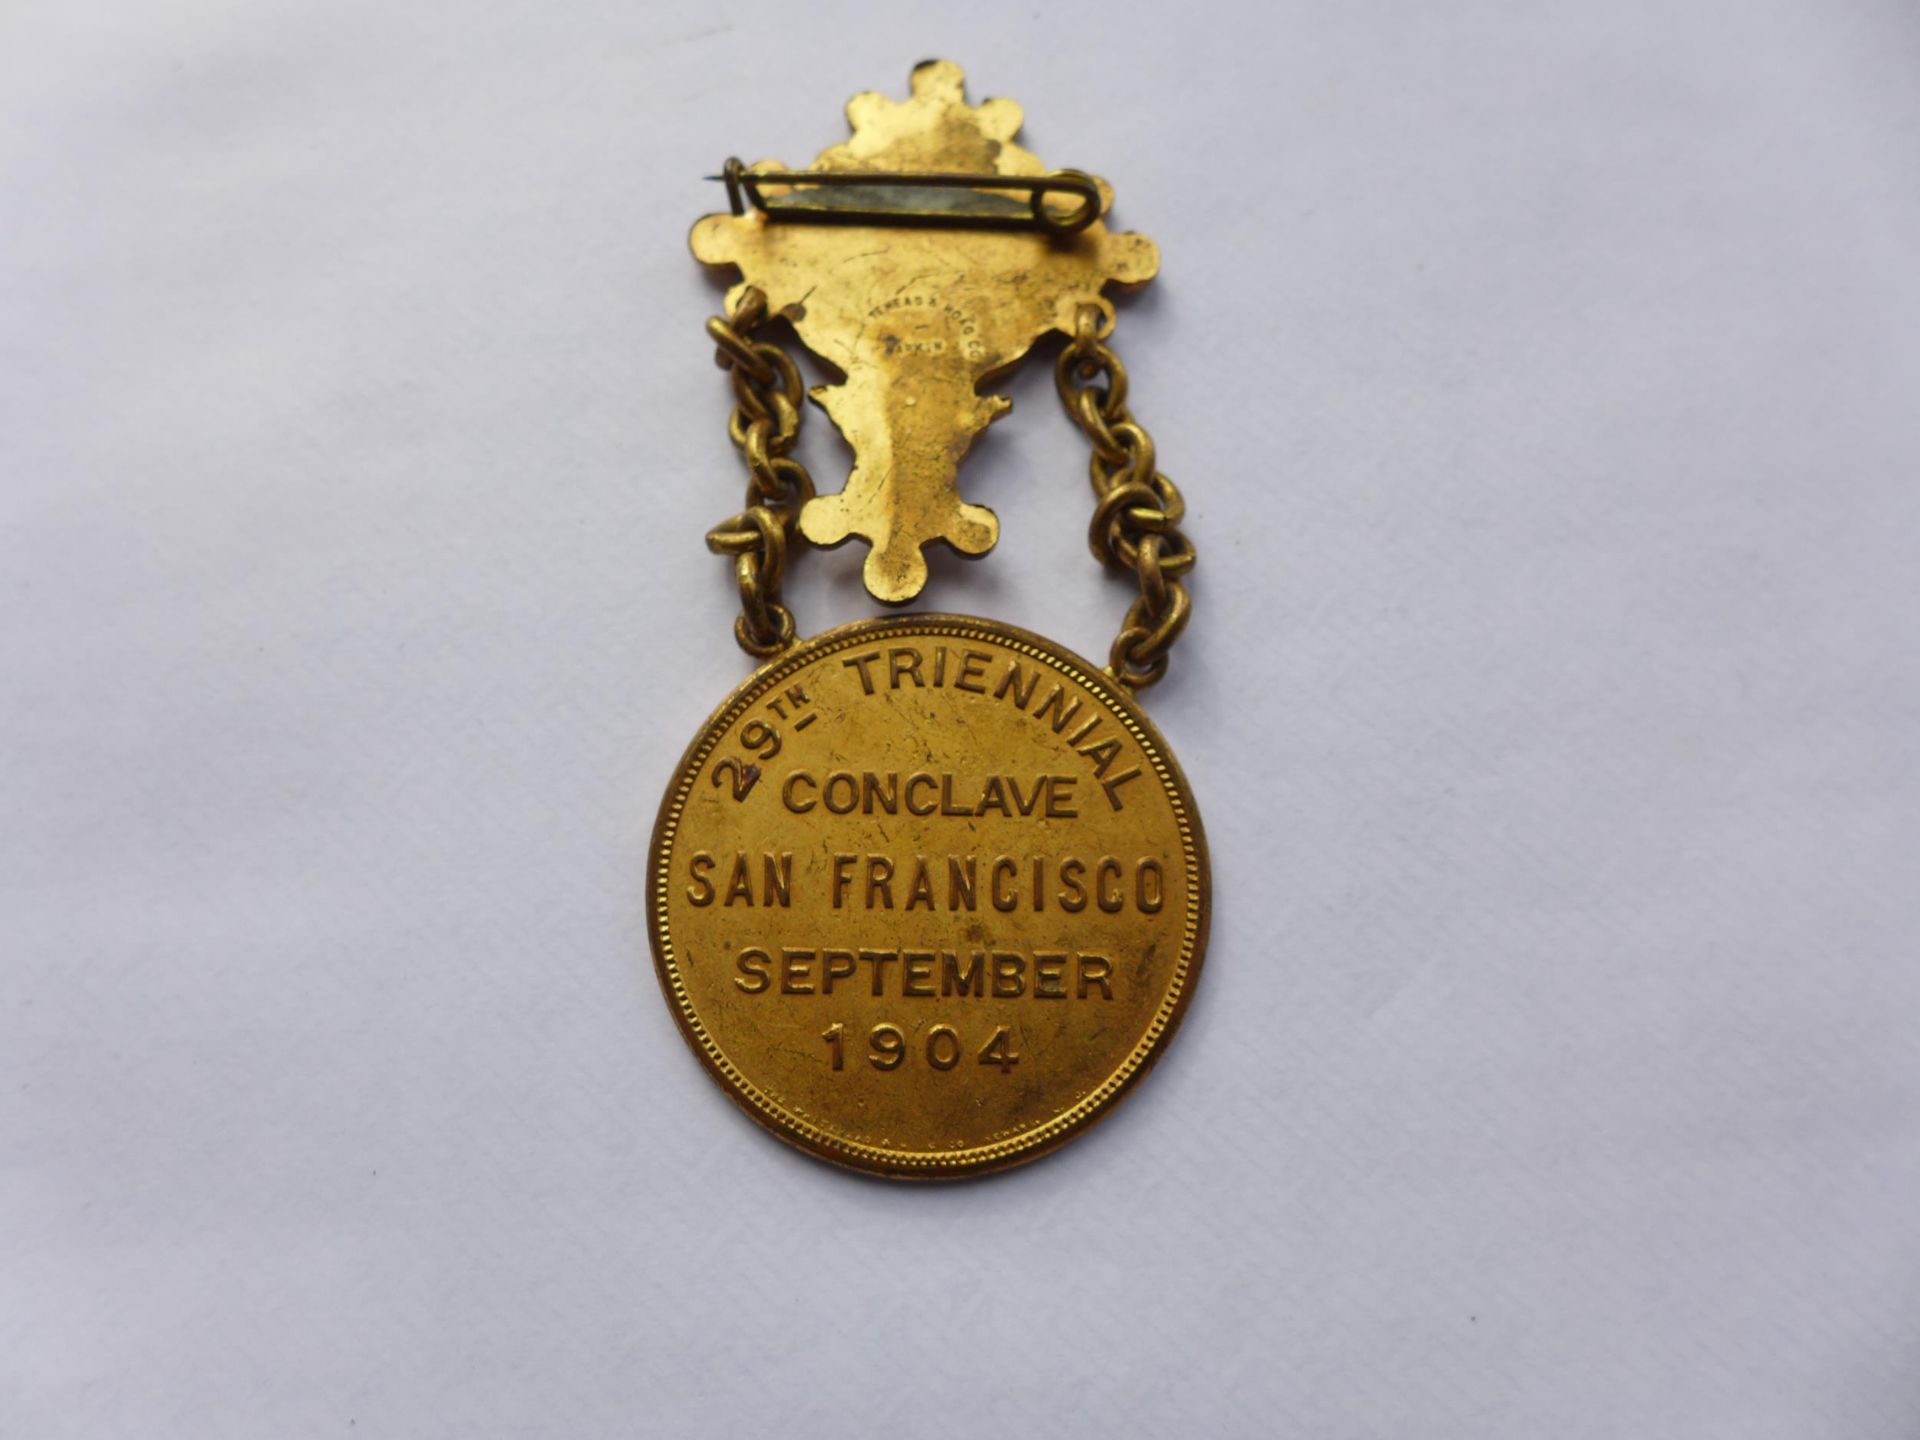 A GILT METAL U.S.A. 29TH TRIENNIAL CONCLAVE MEDAL, HELD AT SAN FRANCISCO SEPTEMBER 1904, LICK - Image 2 of 2